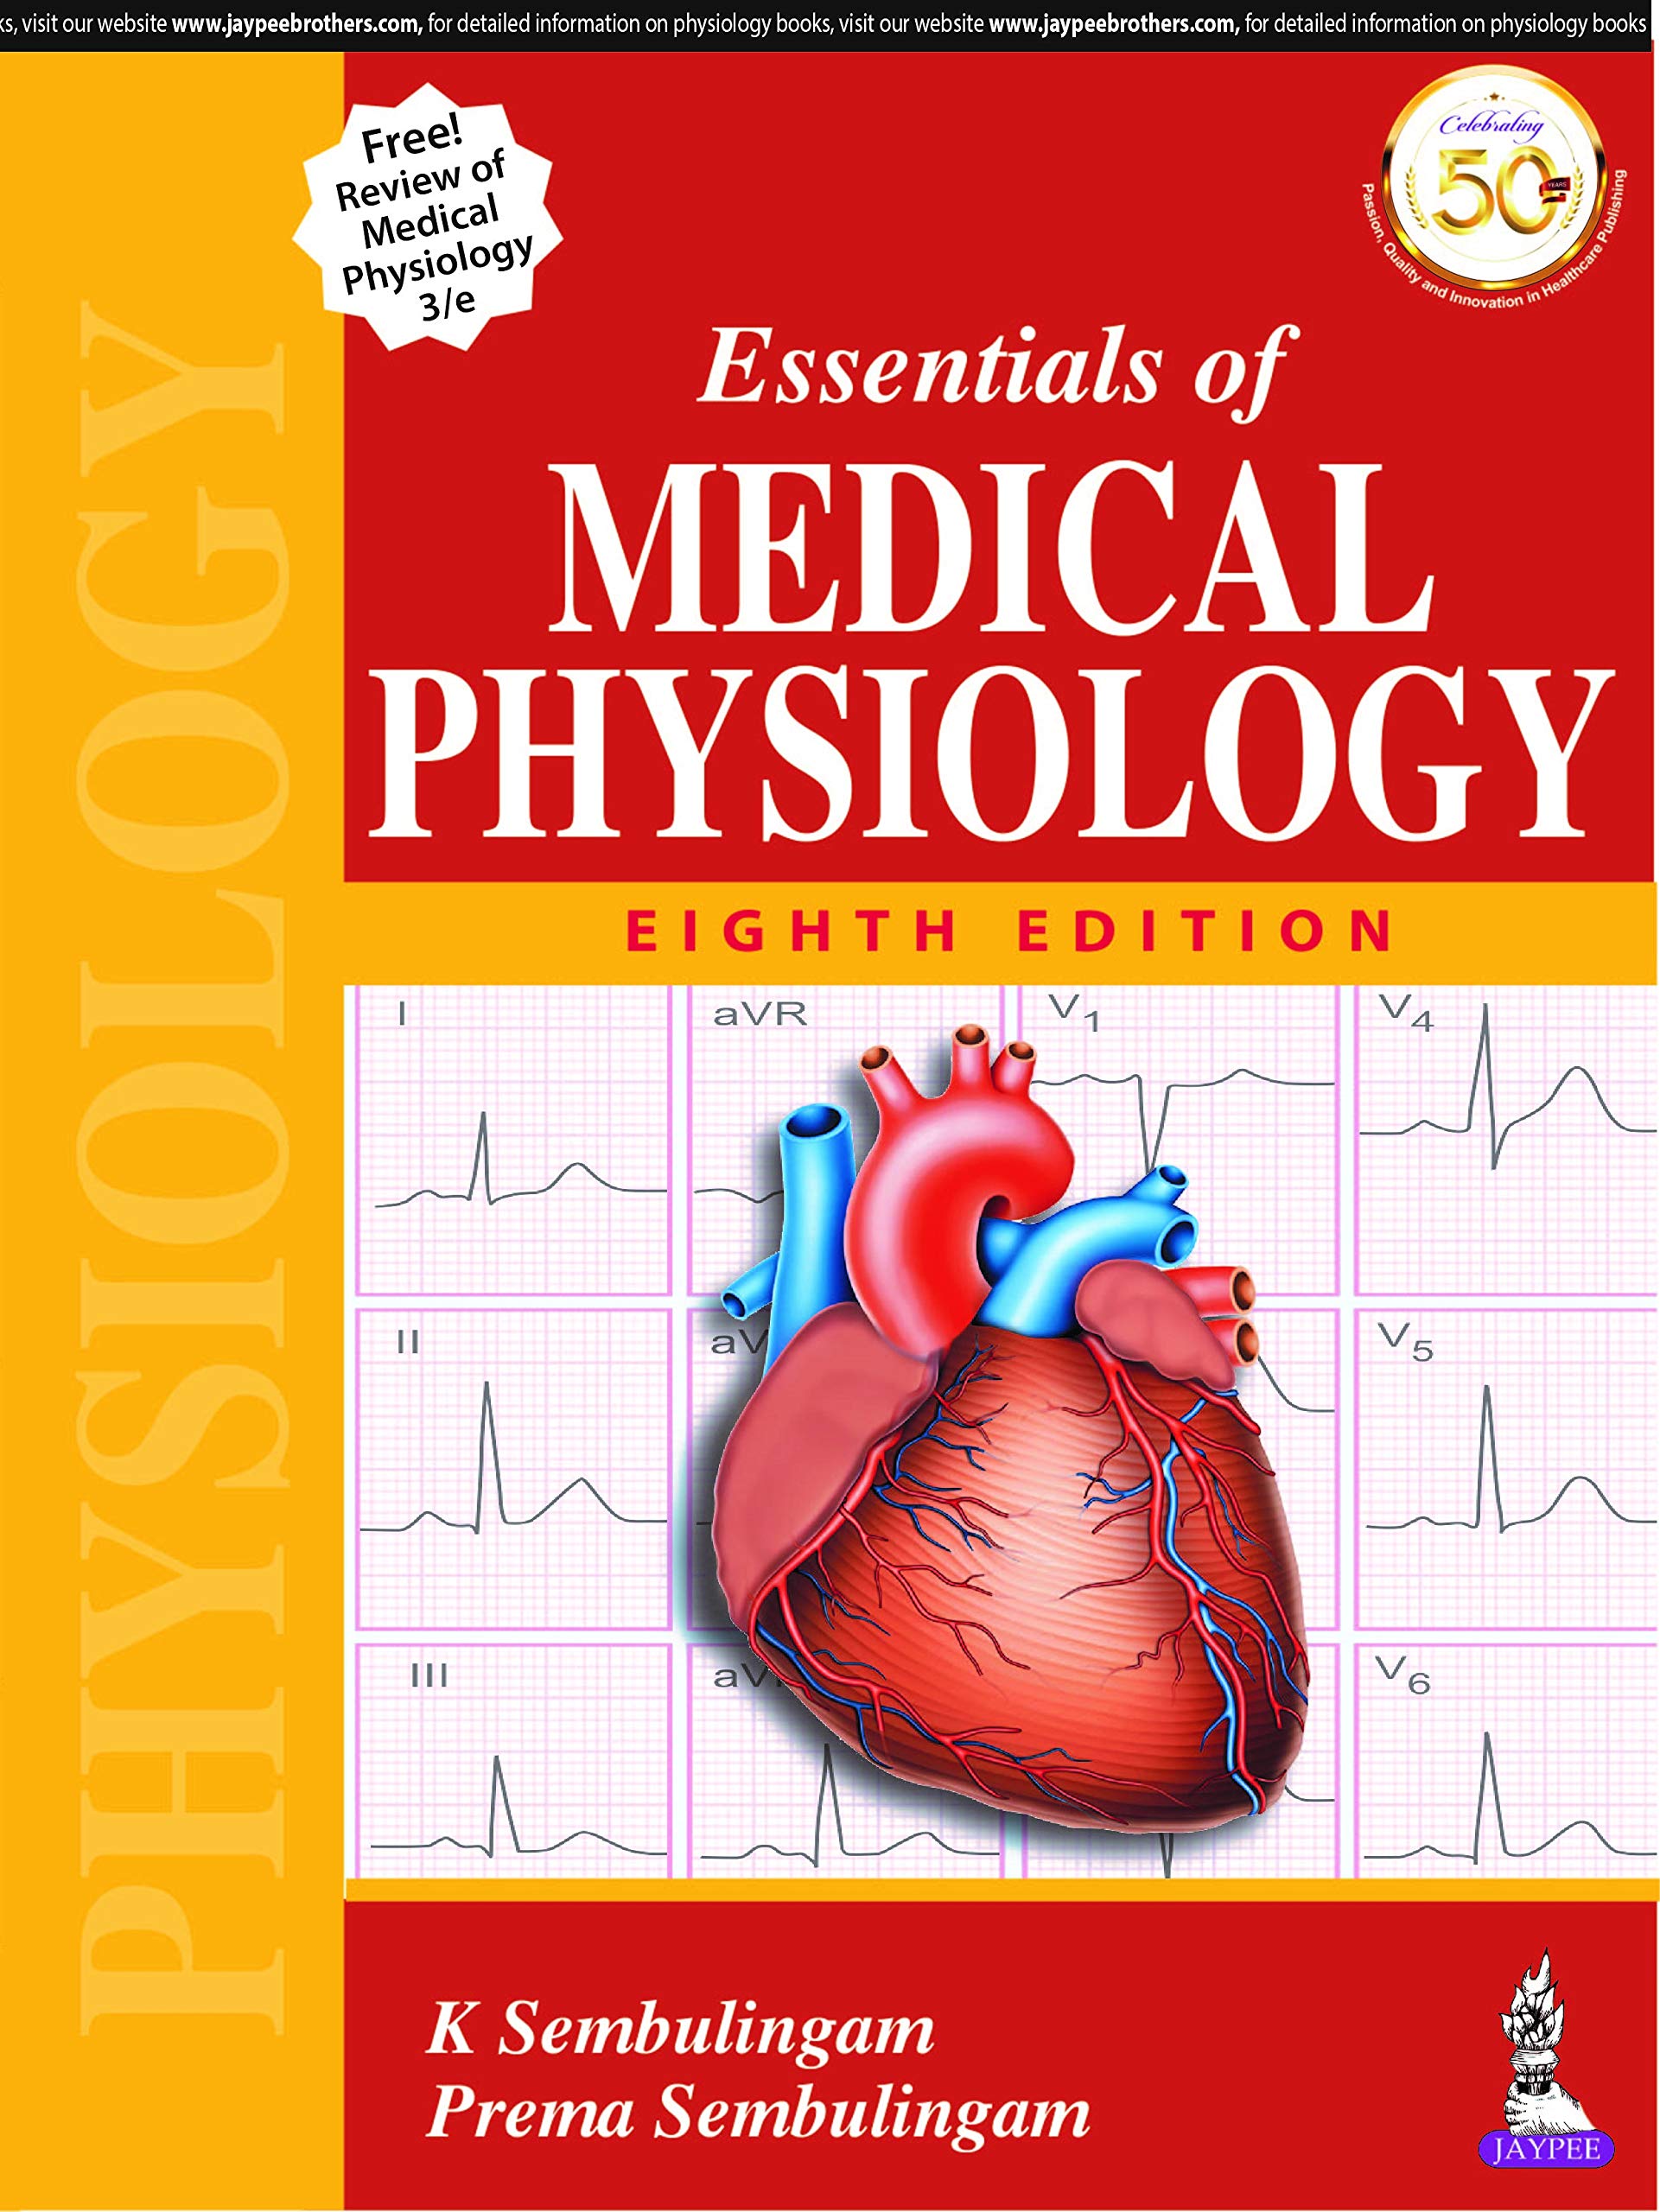 [PDF] Download Essentials of Medical Physiology by K. Sembulingam Book in pdf